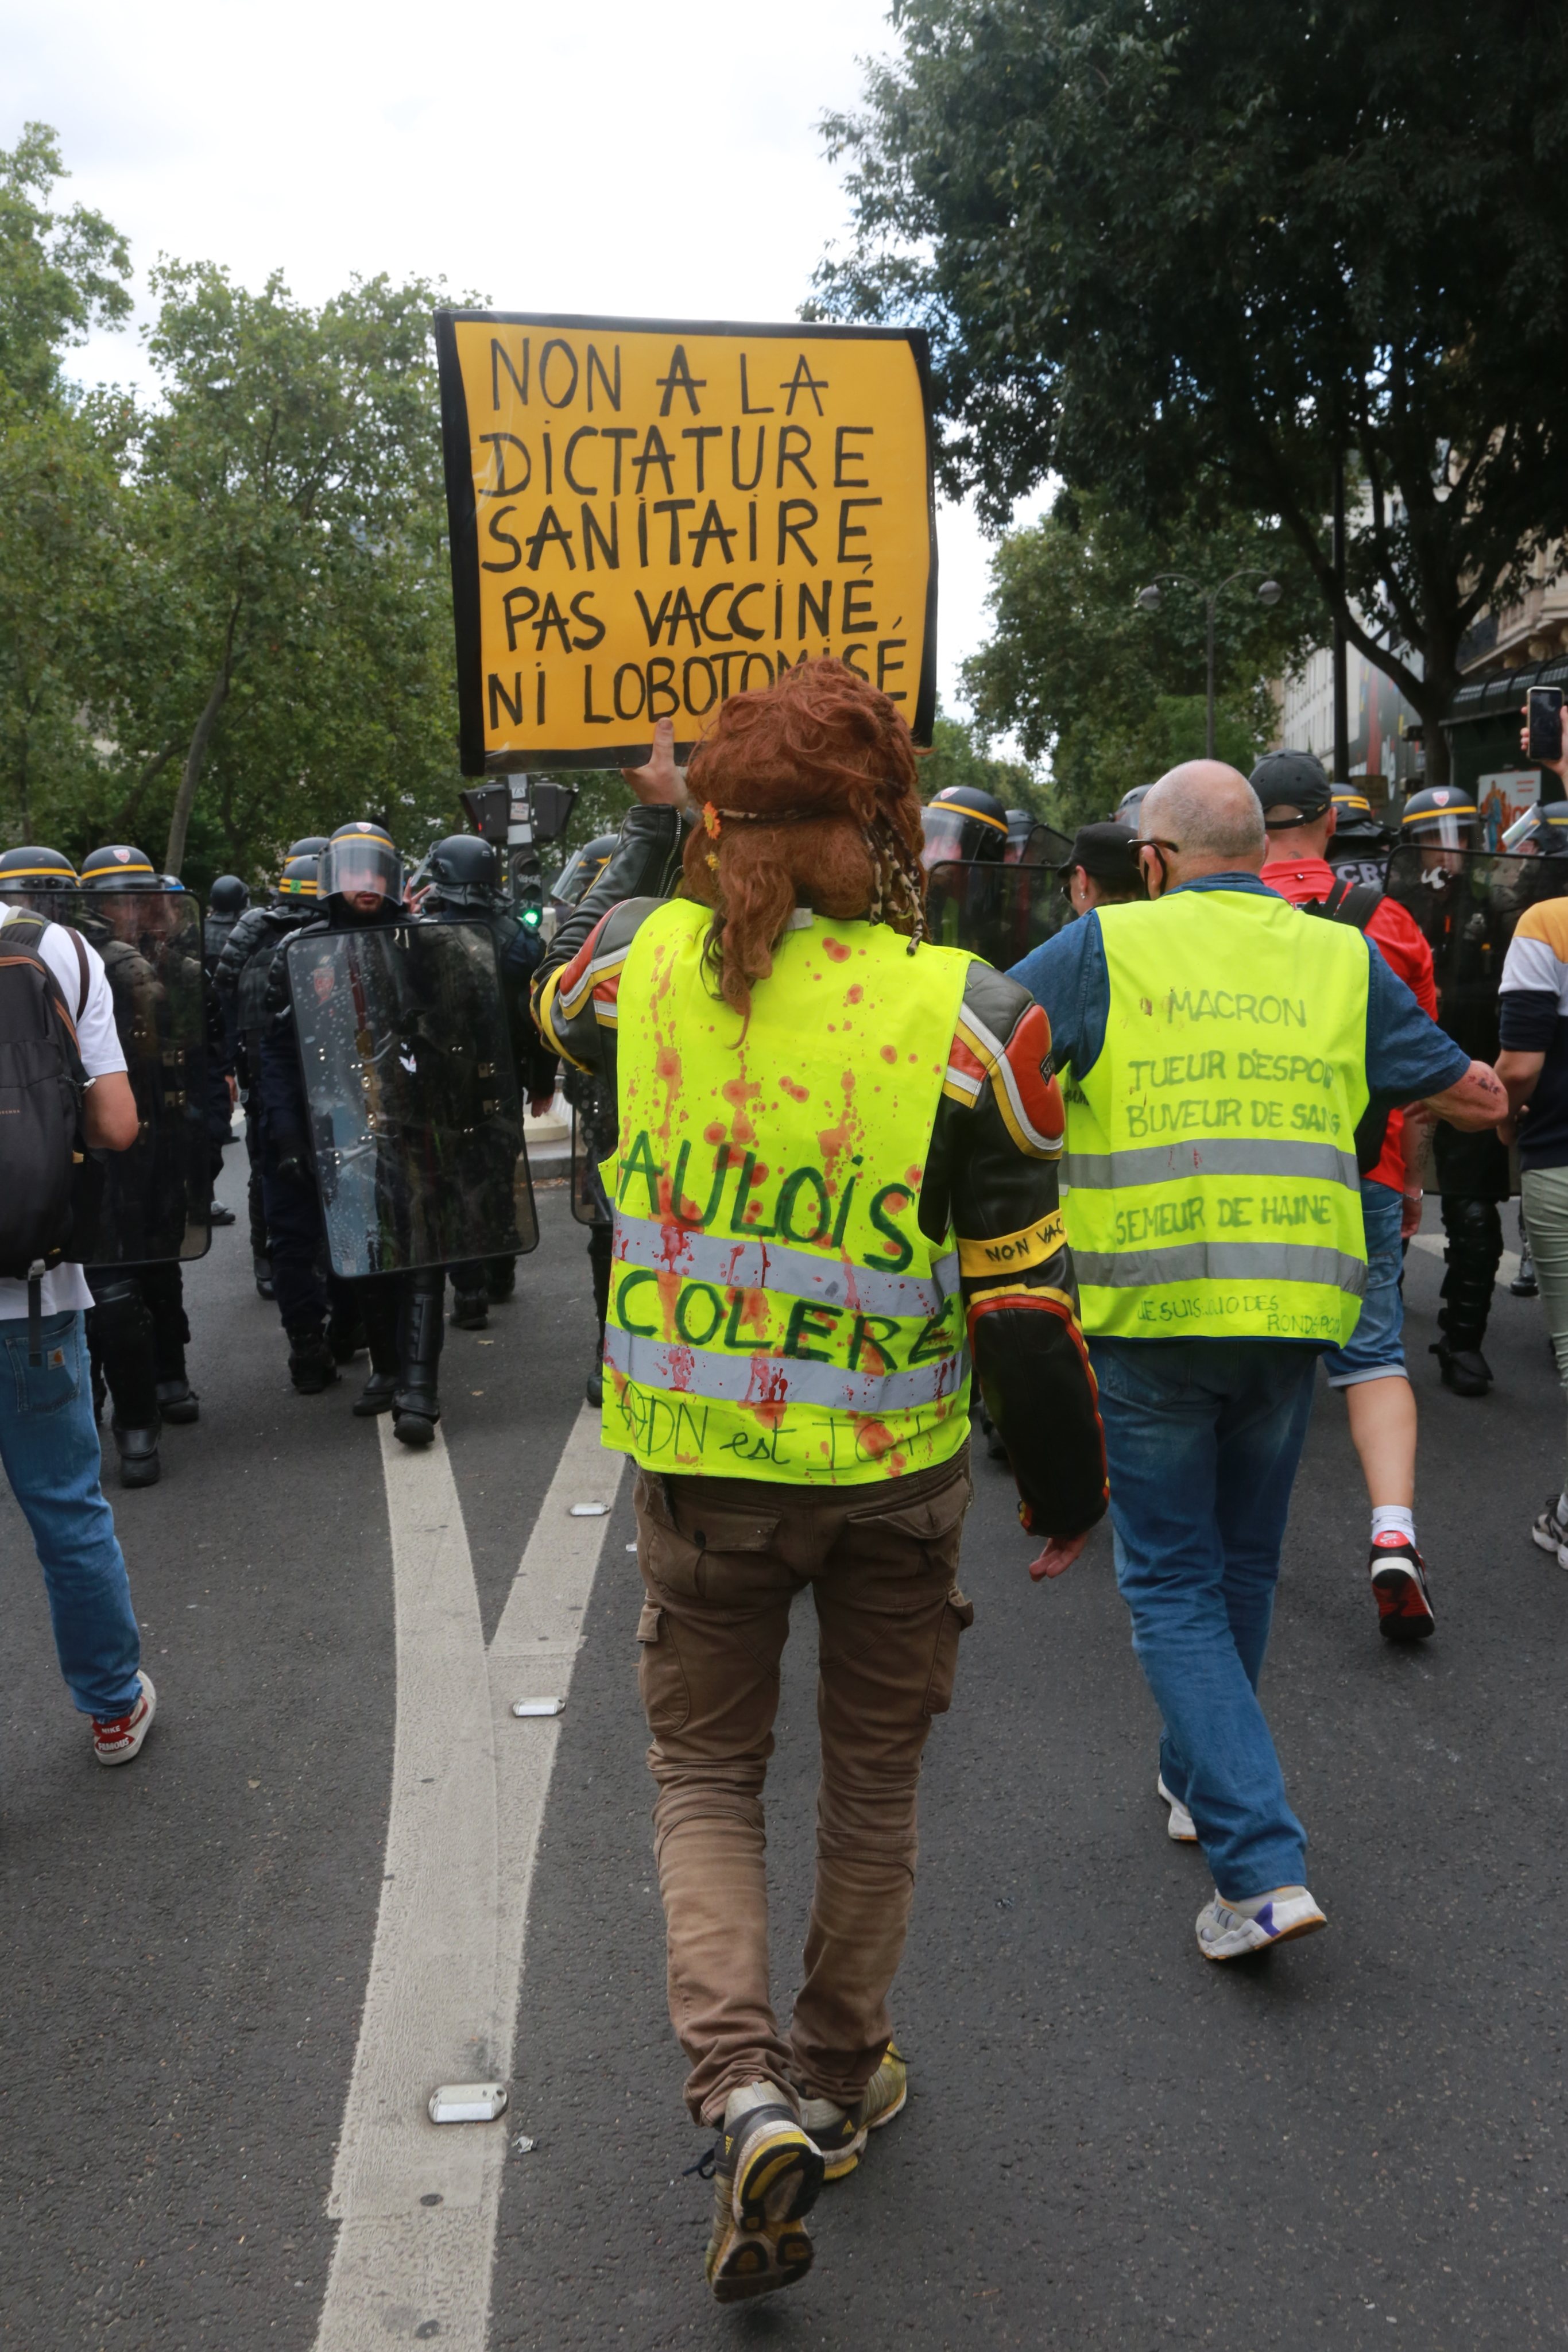 Protesters Hold An Anti-Covid Rule Demonstration In Paris